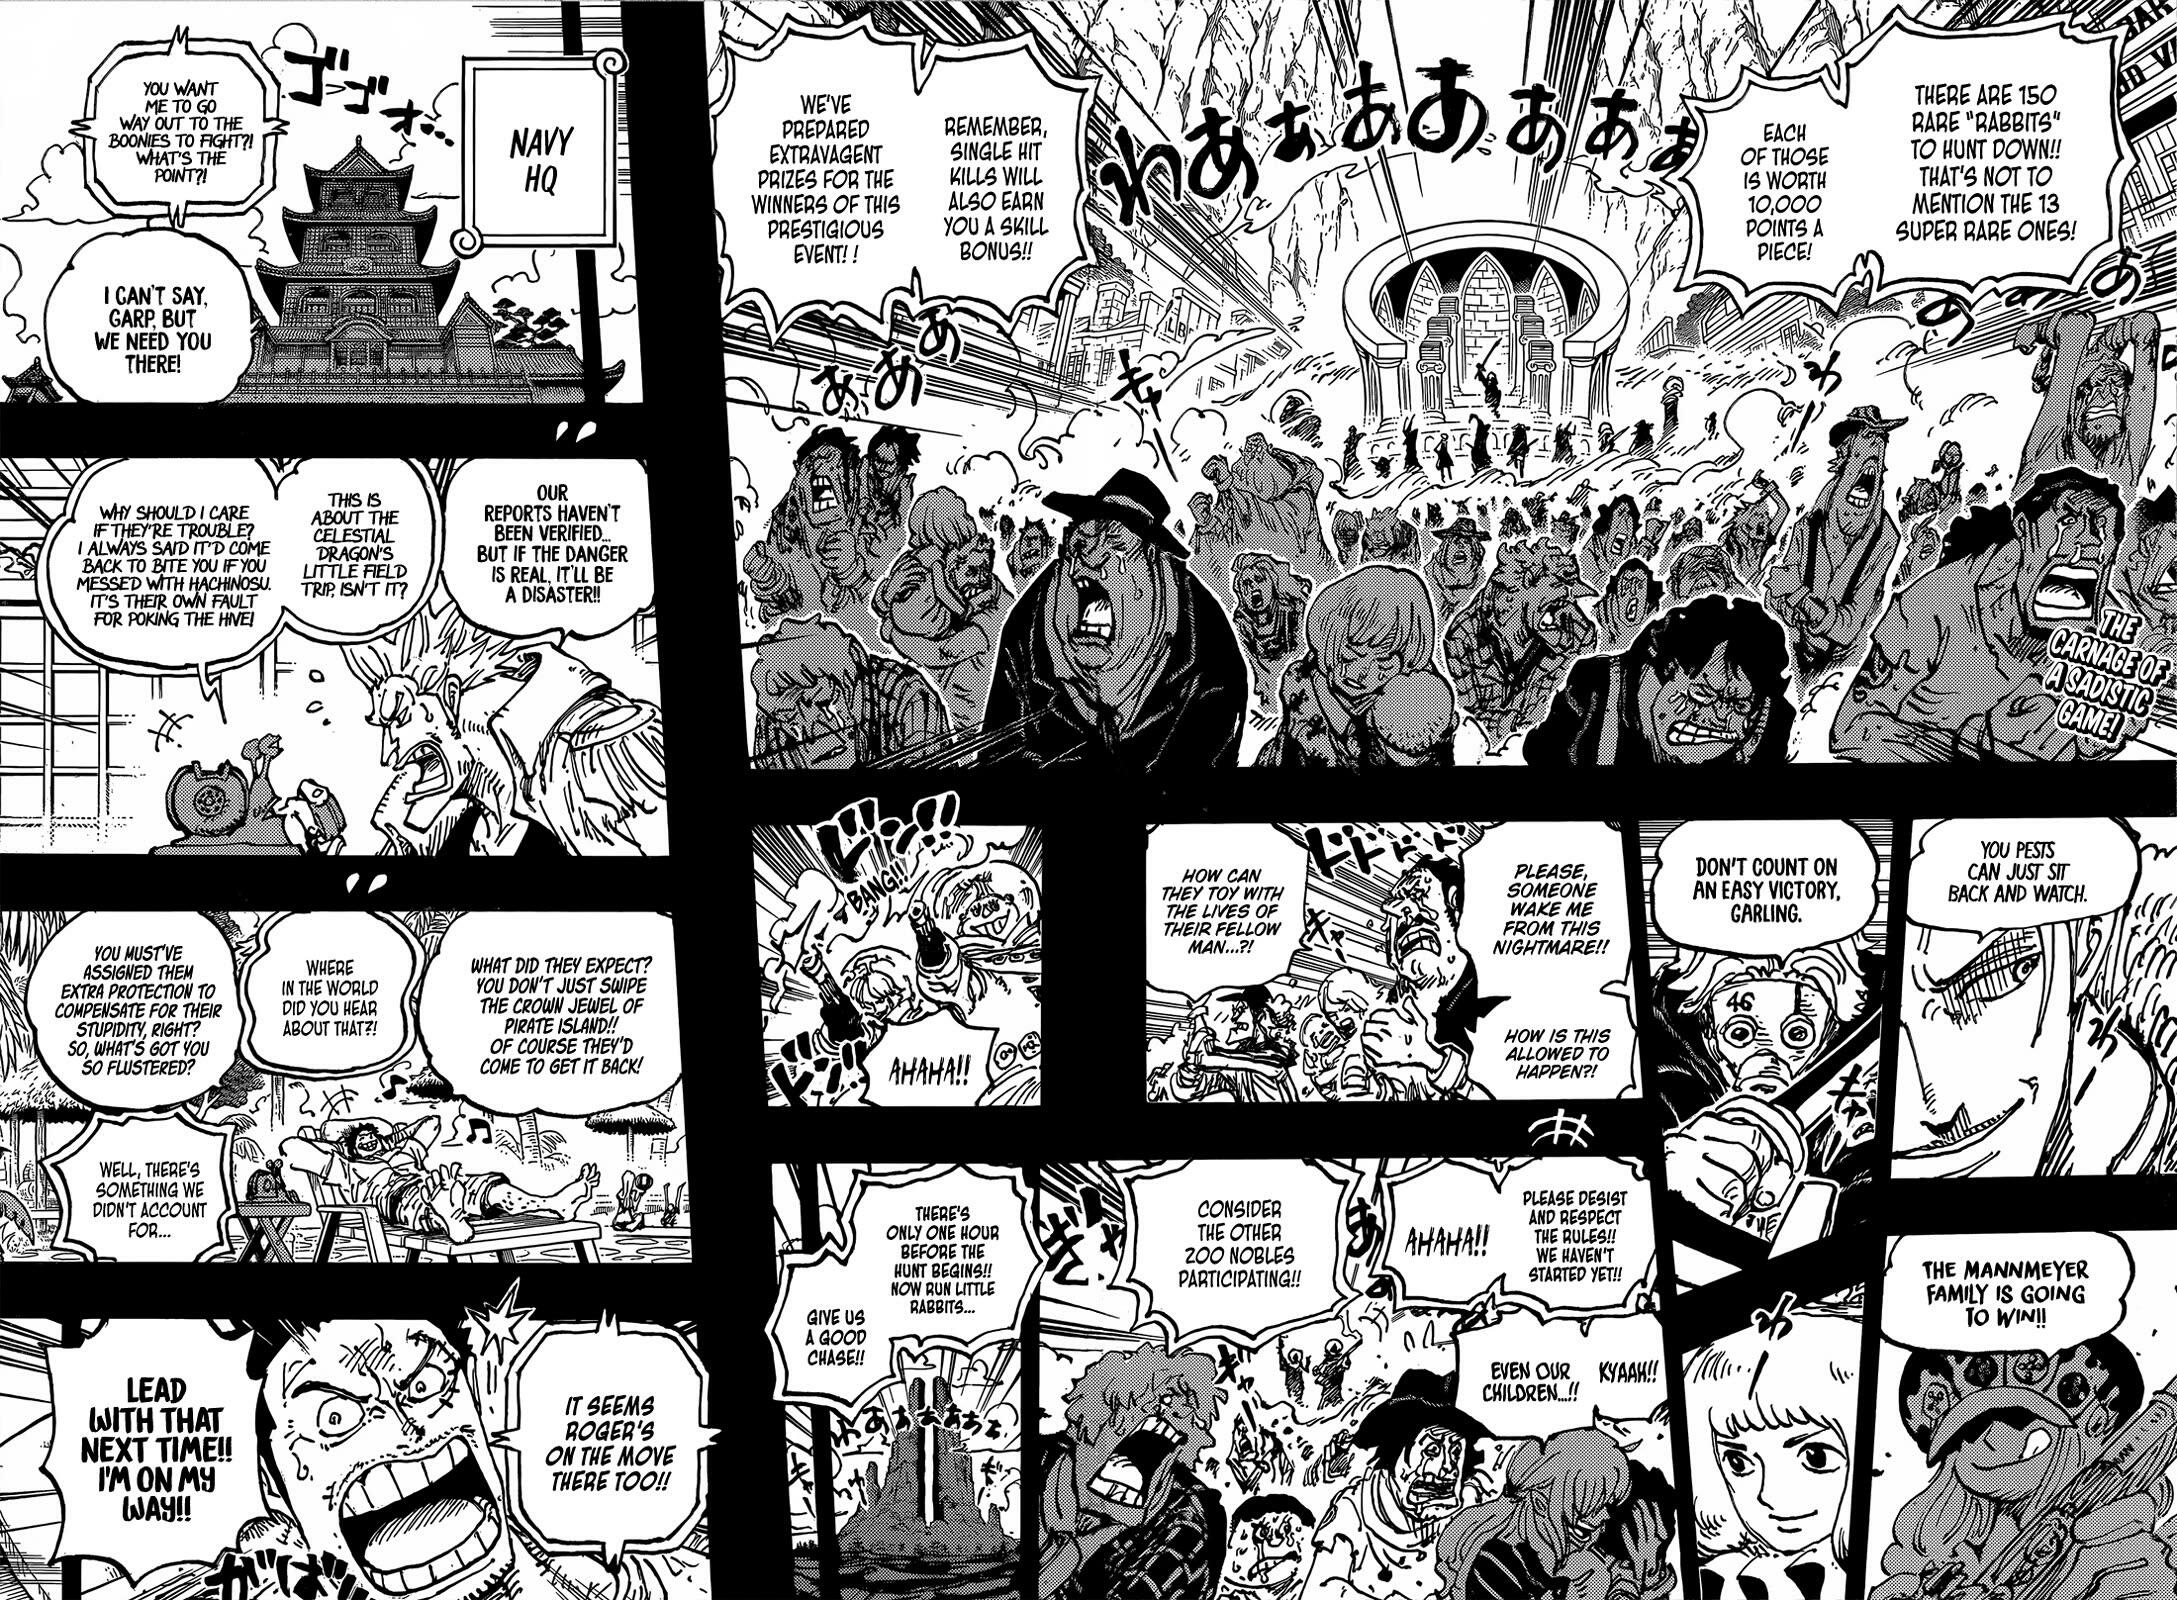 Spoiler - One Piece Chapter 1034 Spoiler Summaries and Images